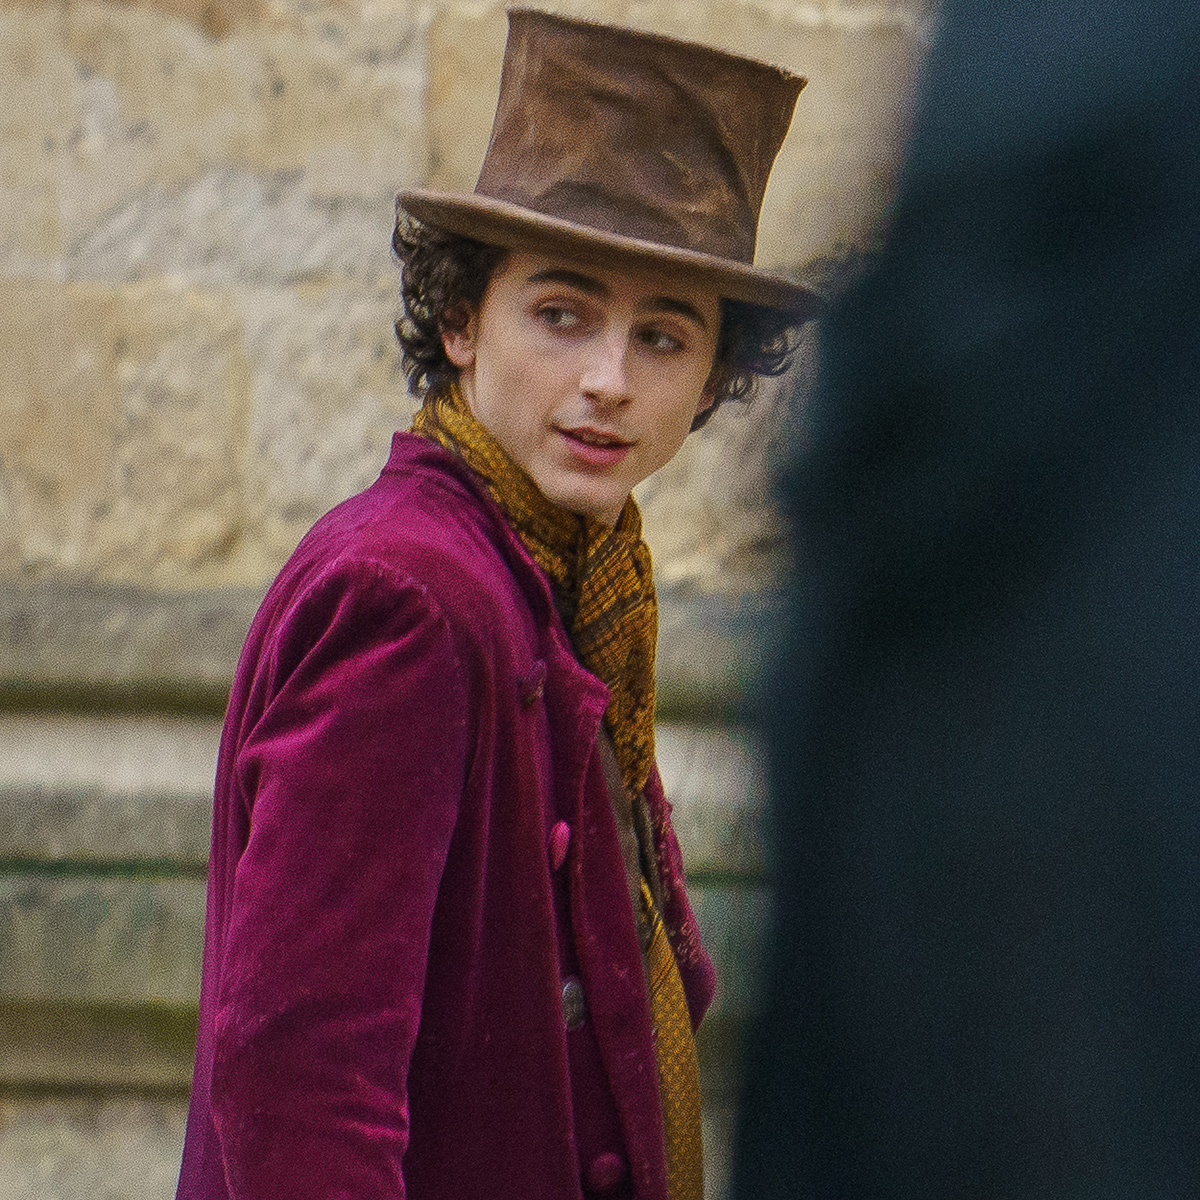 Timothee Chalamet debuts as Willy Wonka in prequel's first trailer